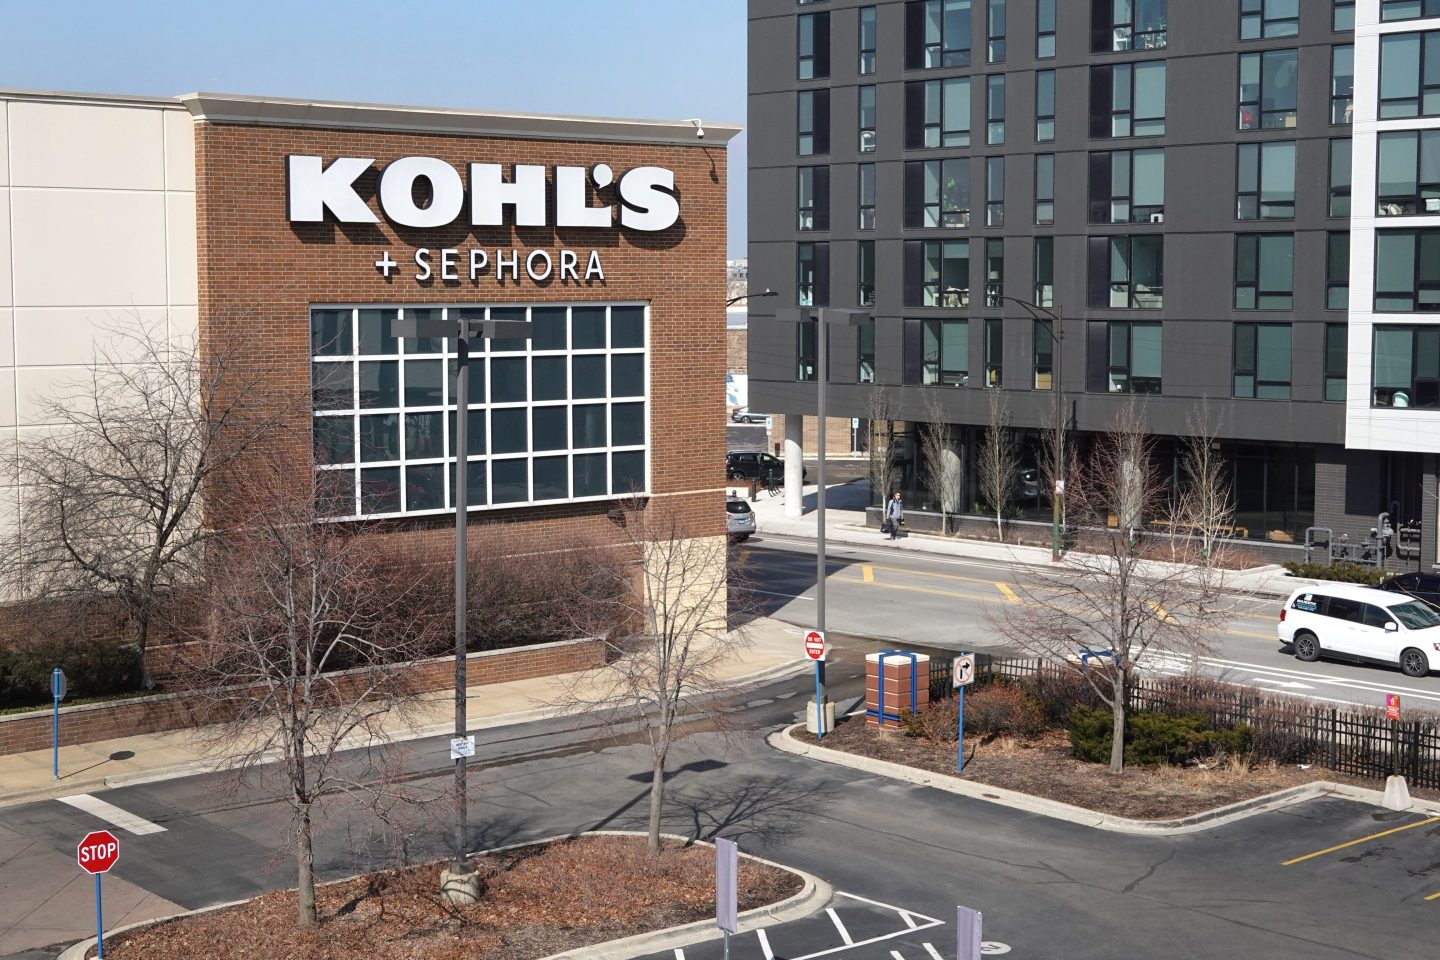 Kohl's store and empty parking lot